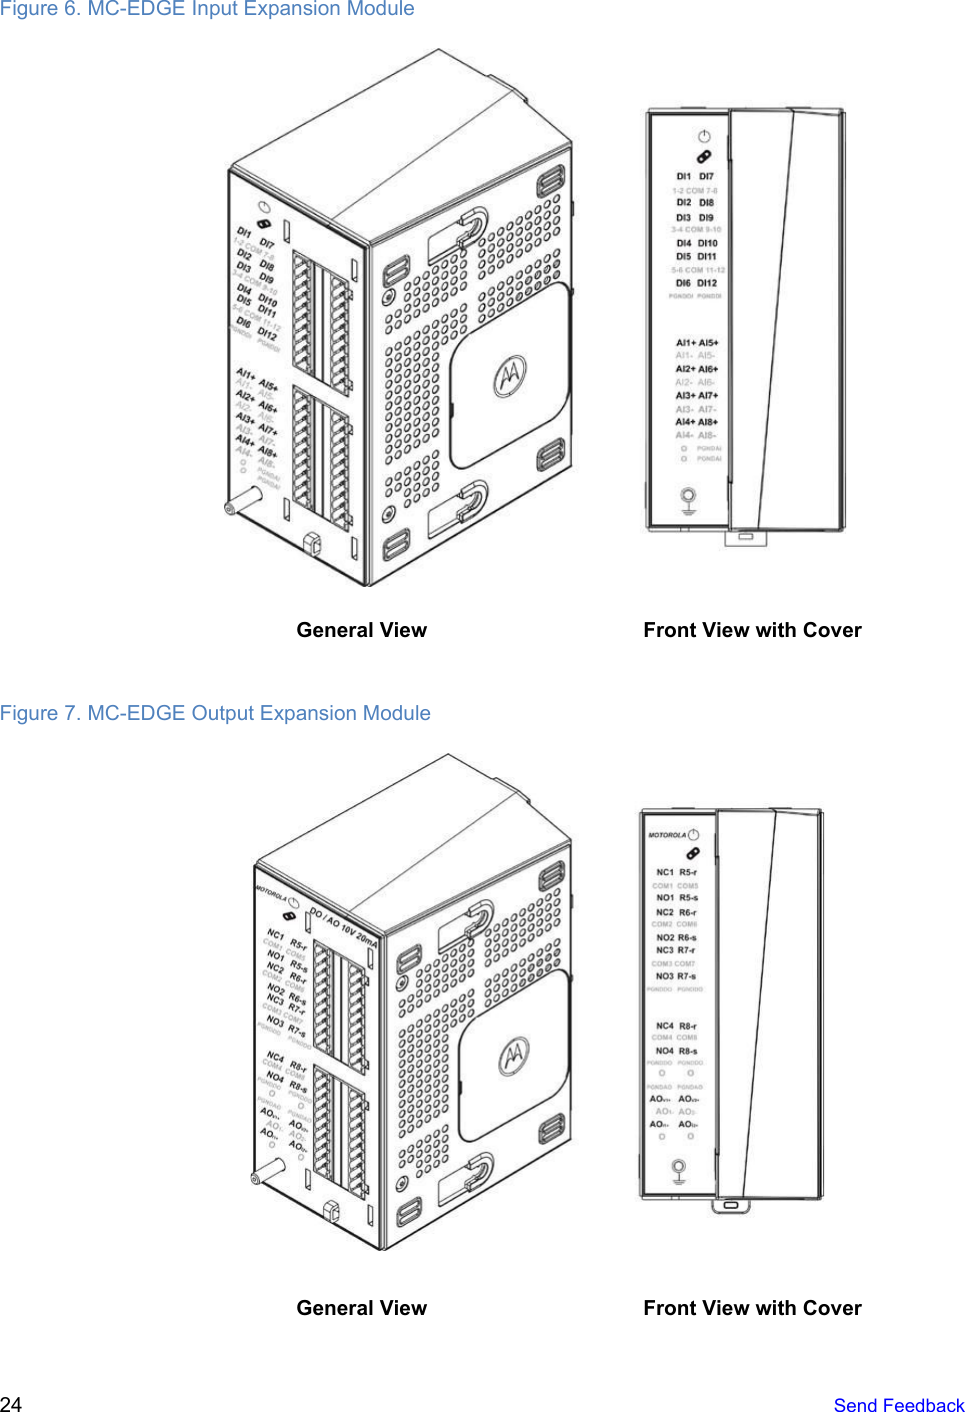   Figure 6. MC-EDGE Input Expansion Module   General View Front View with Cover  Figure 7. MC-EDGE Output Expansion Module   General View Front View with Cover  24   Send Feedback  